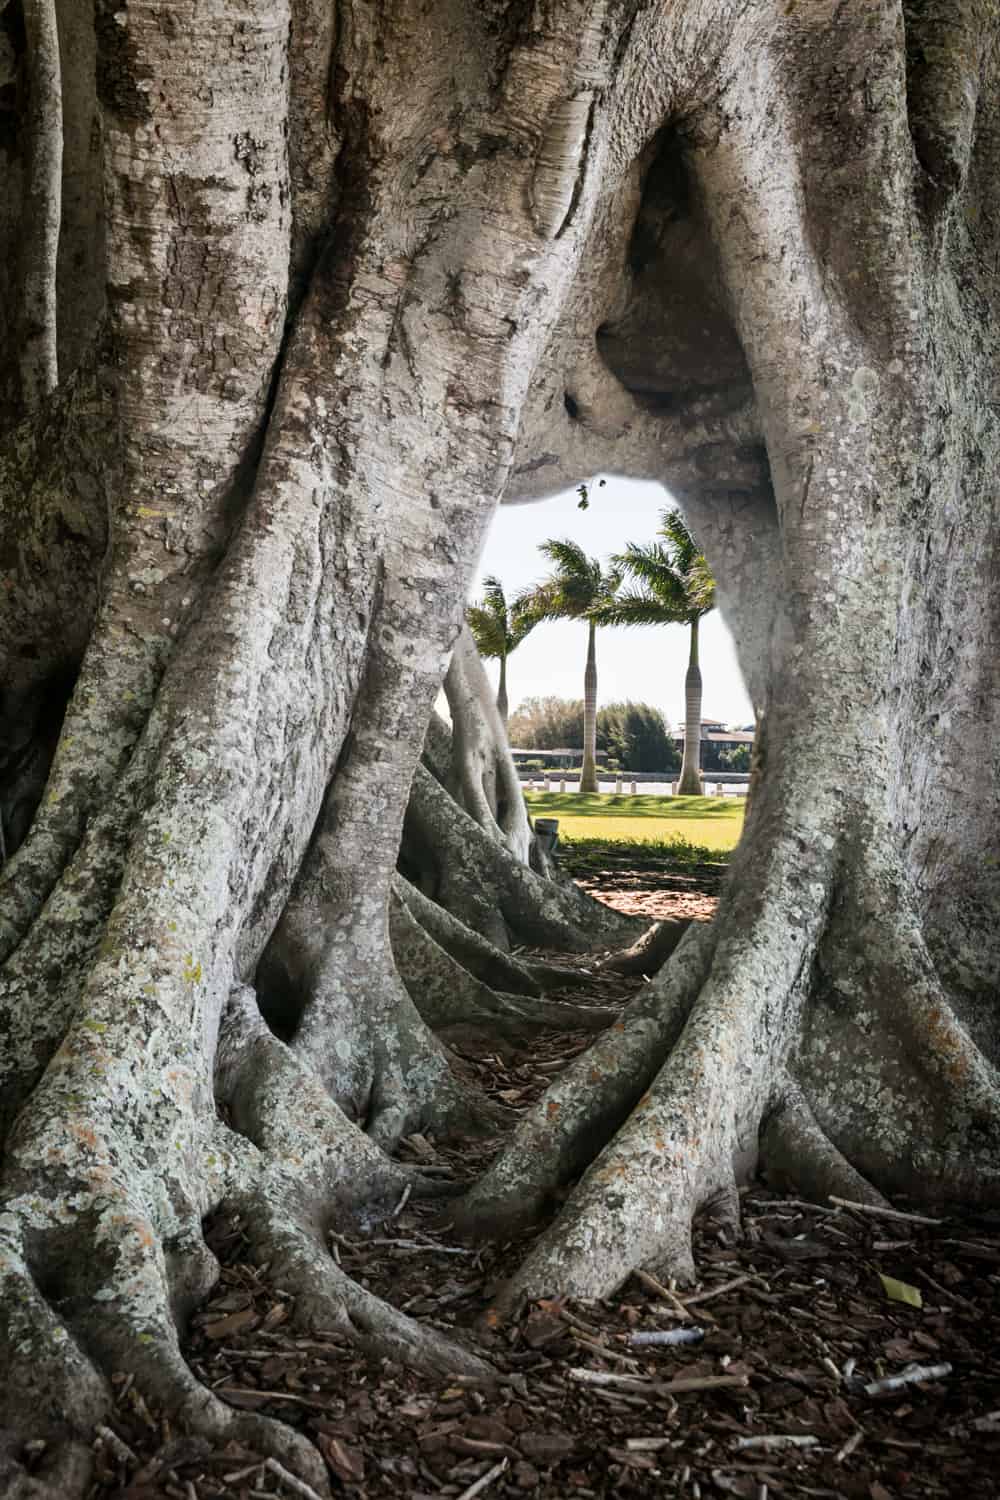 View of palm trees through hole in banyan tree in Sarasota